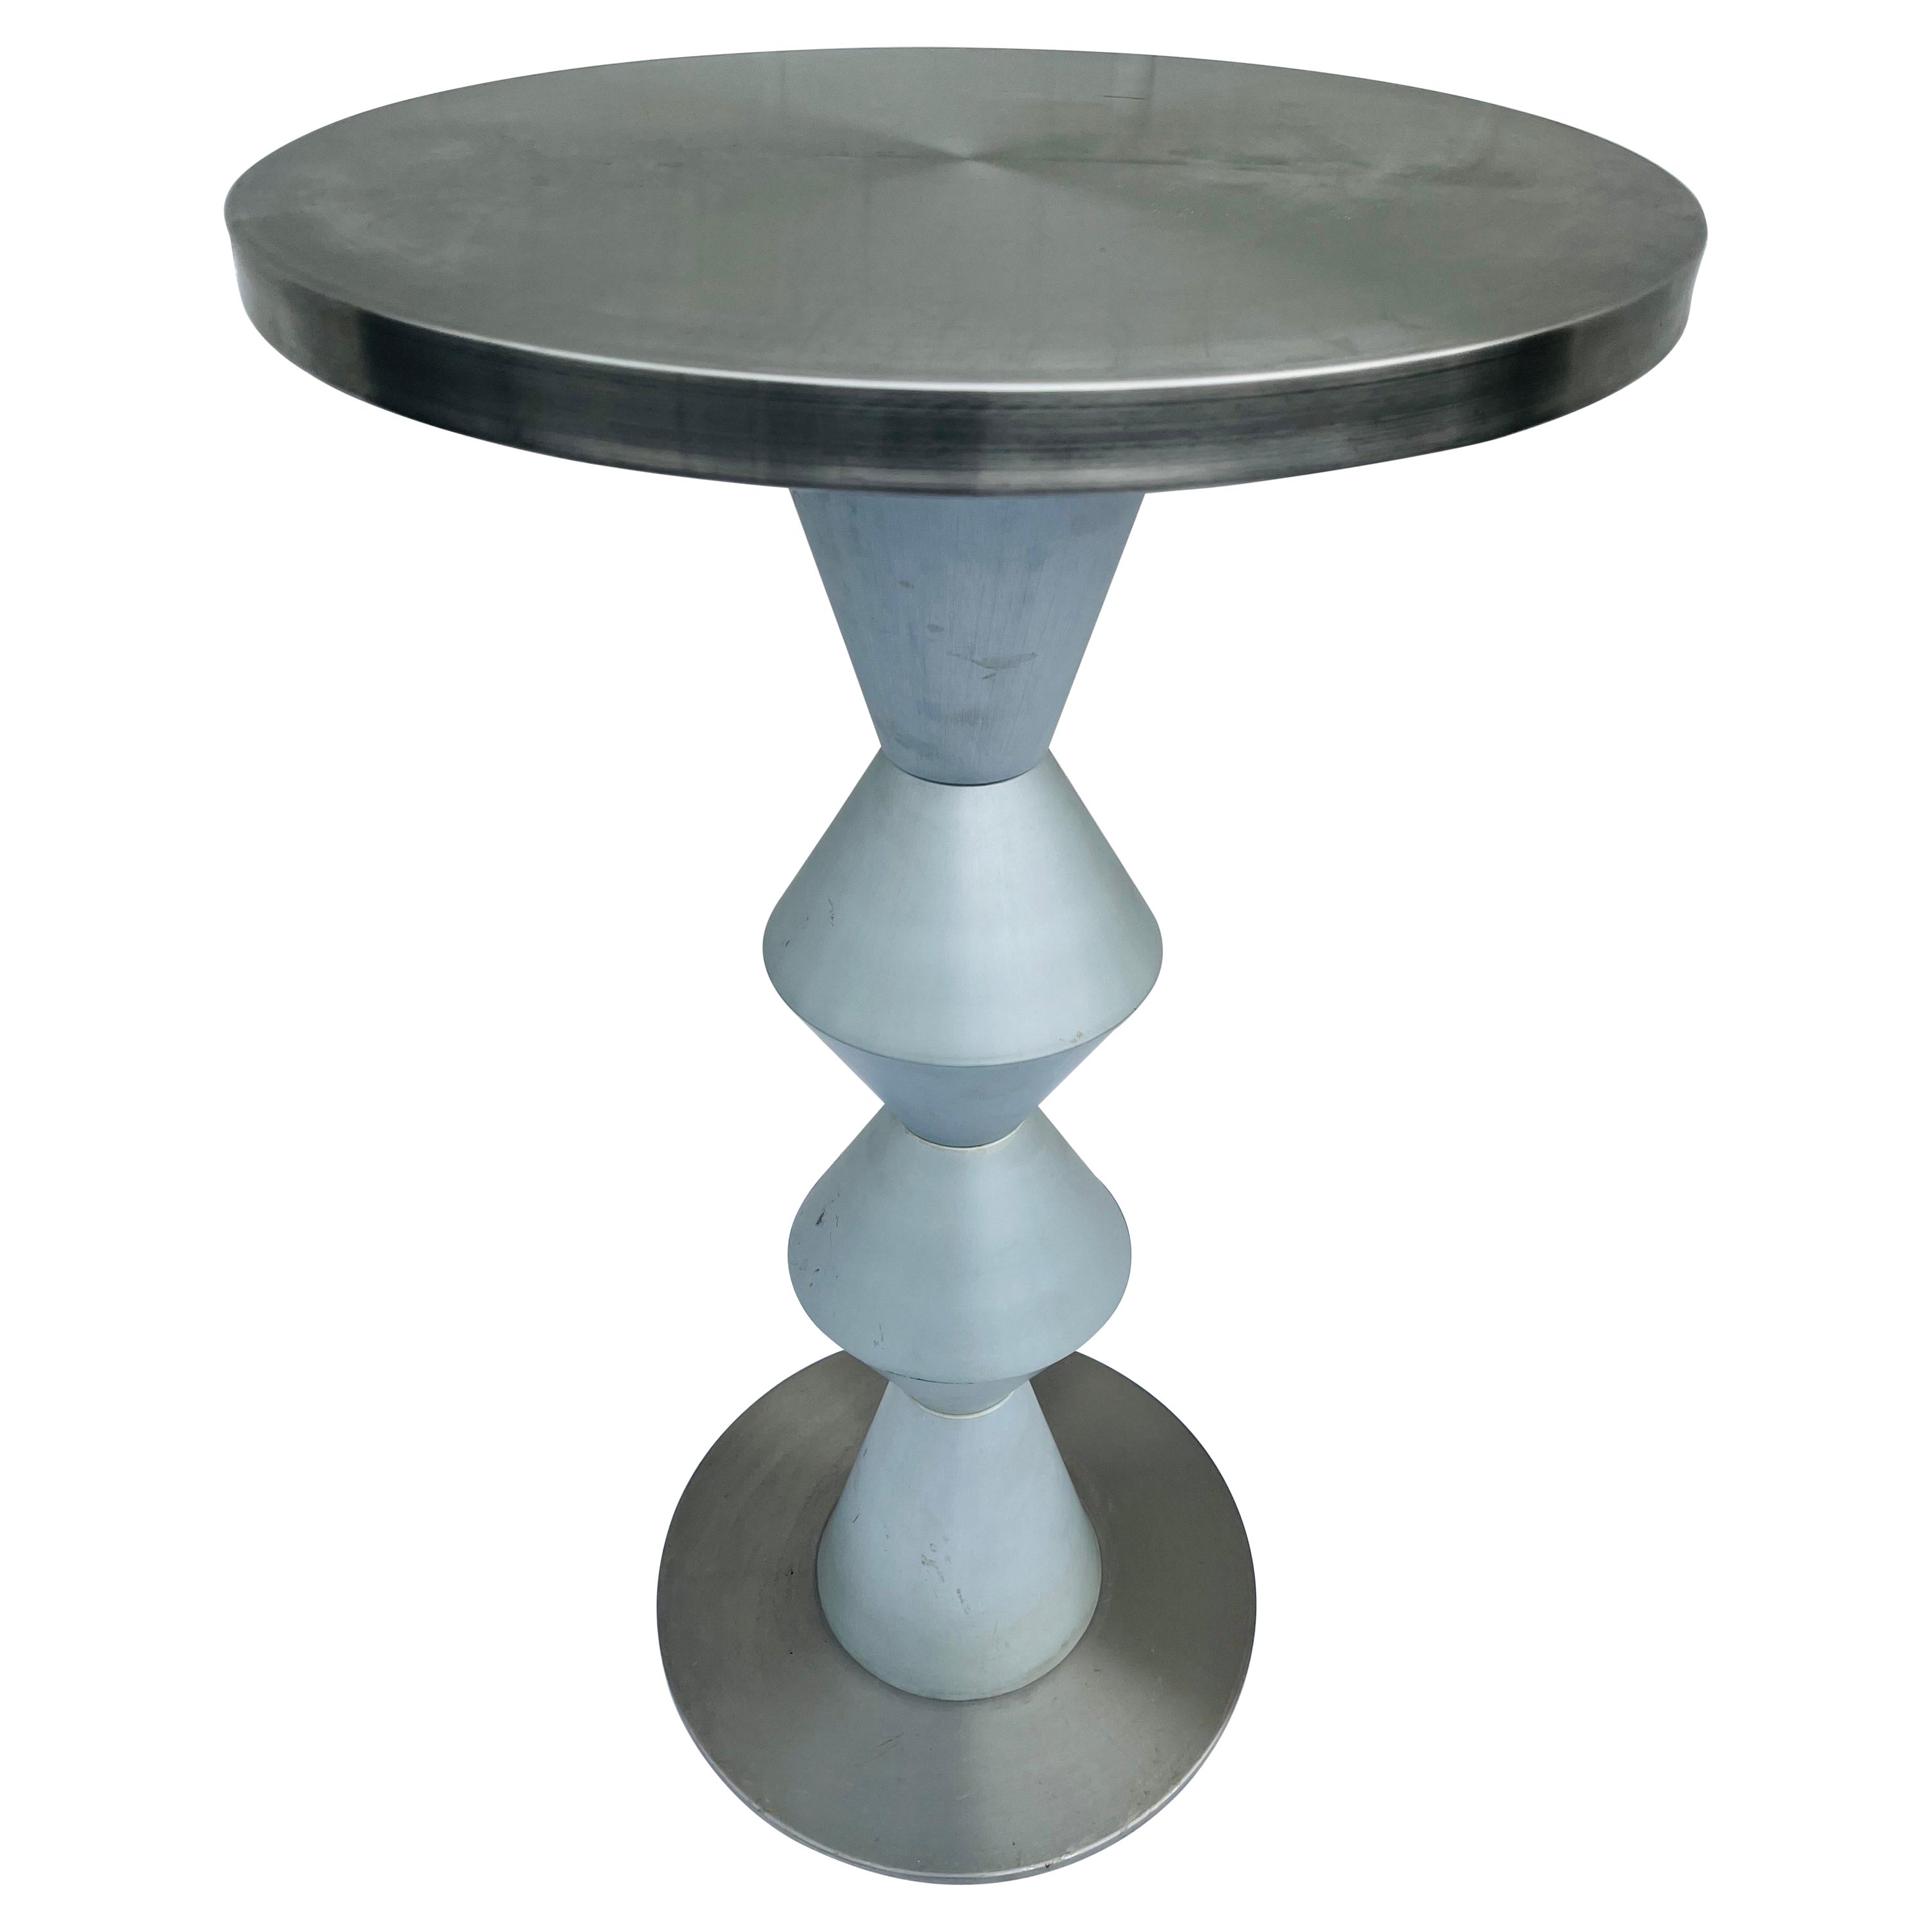 Vintage Postmodern Vibe Aluminum and Stainless Sculptural Brancusi Style Table For Sale